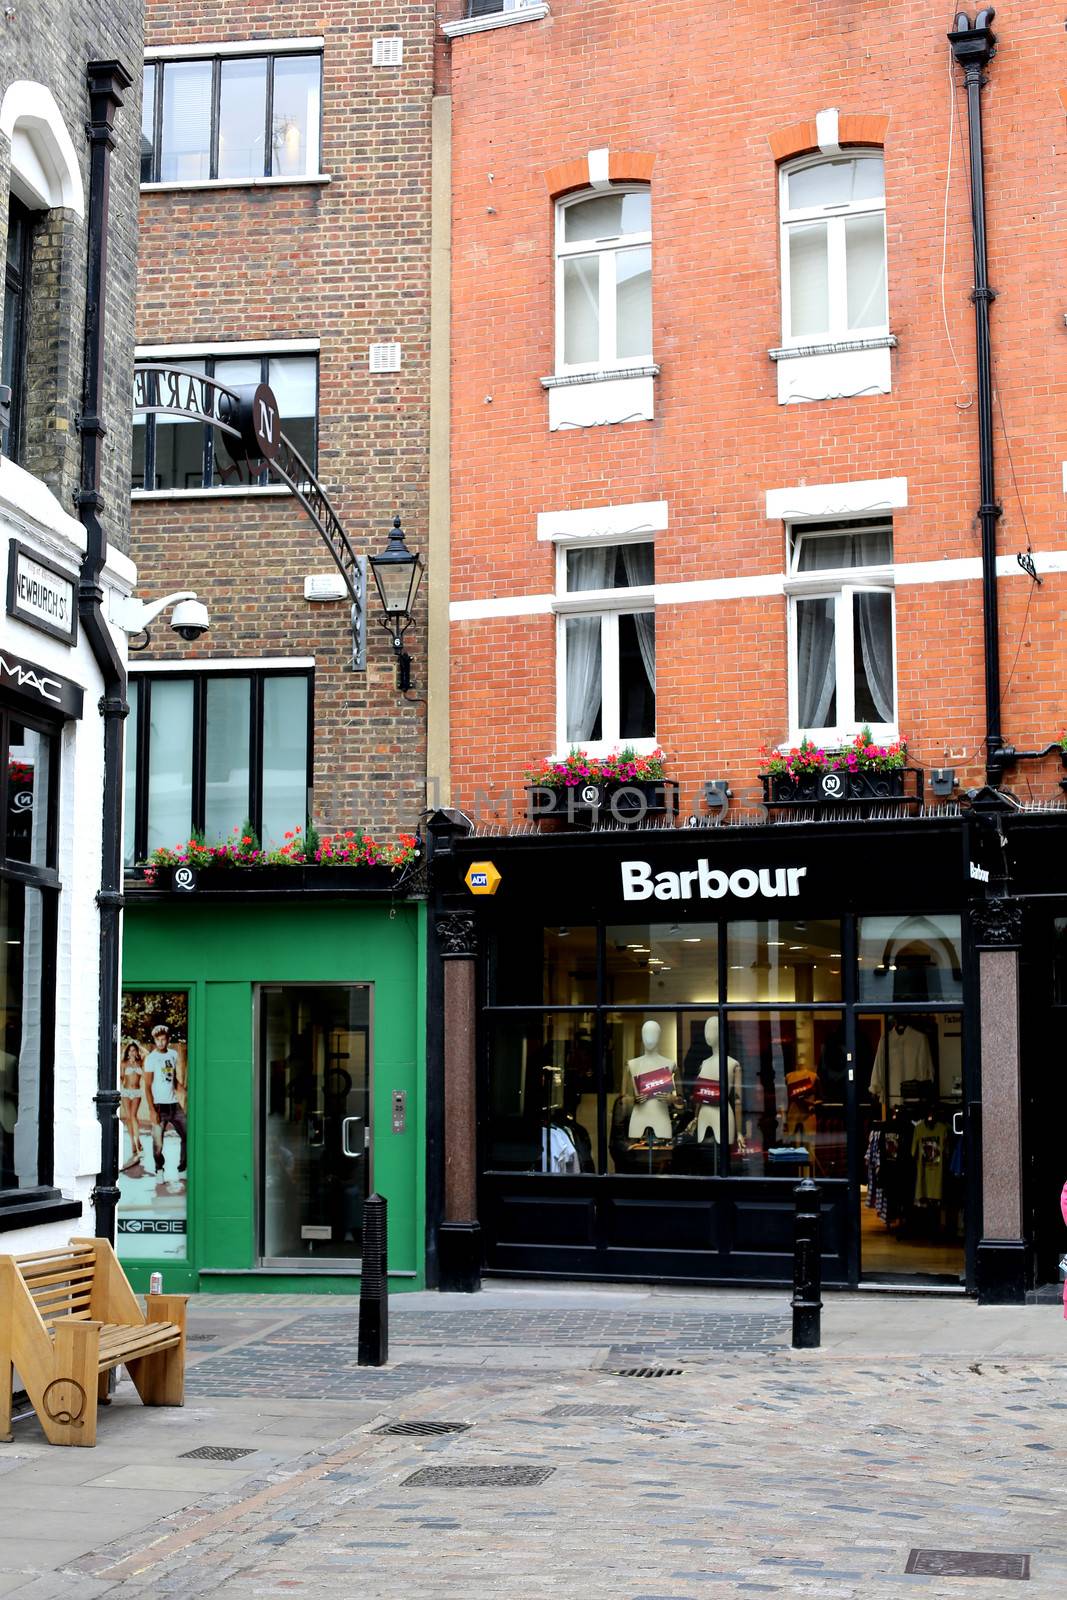 Barbour Shop Front Foubert's Place London by Whiteboxmedia